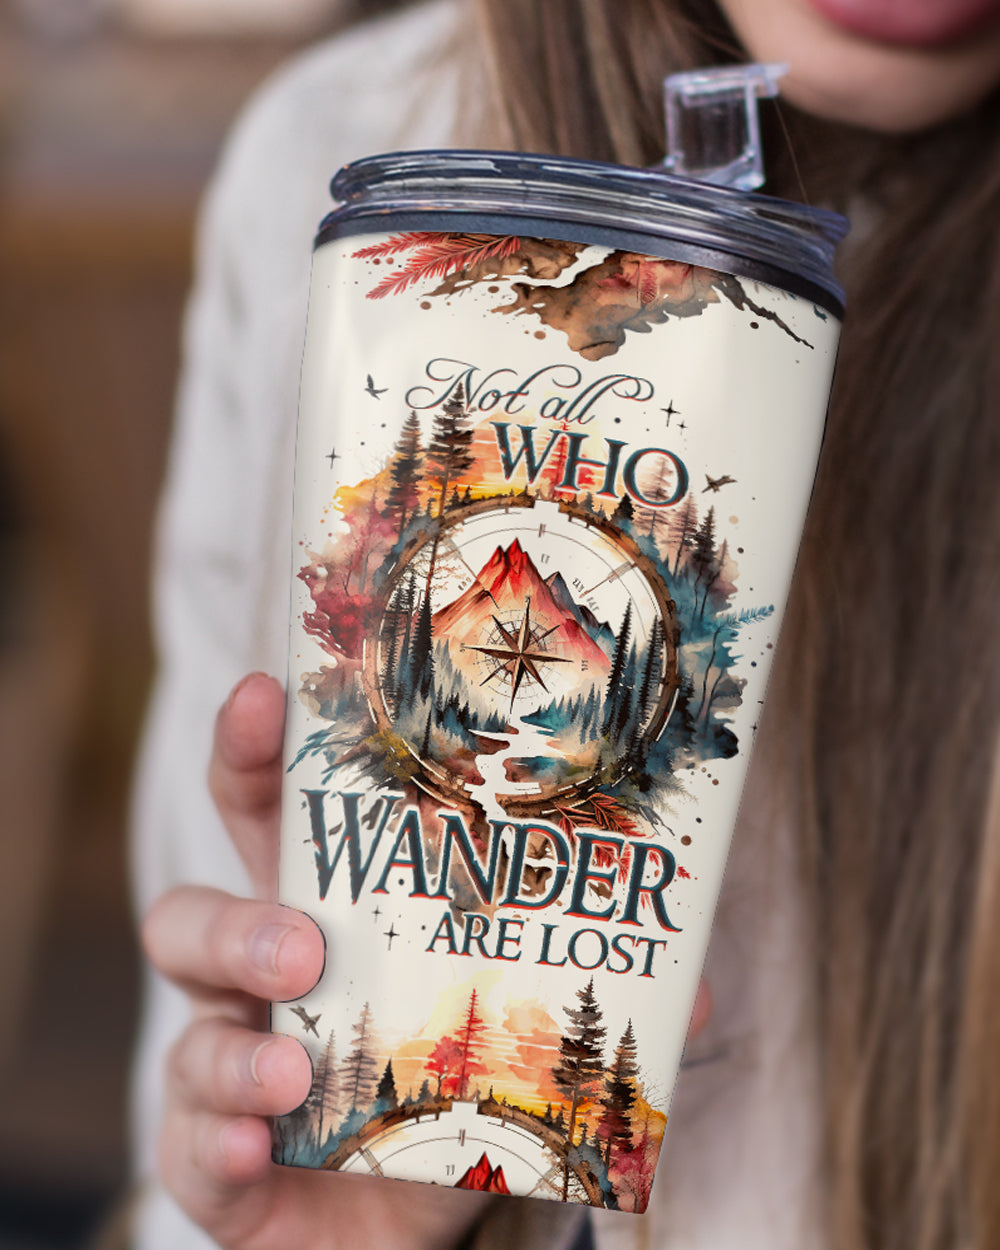 NOT ALL WHO WANDER ARE LOST TUMBLER - TY1605234